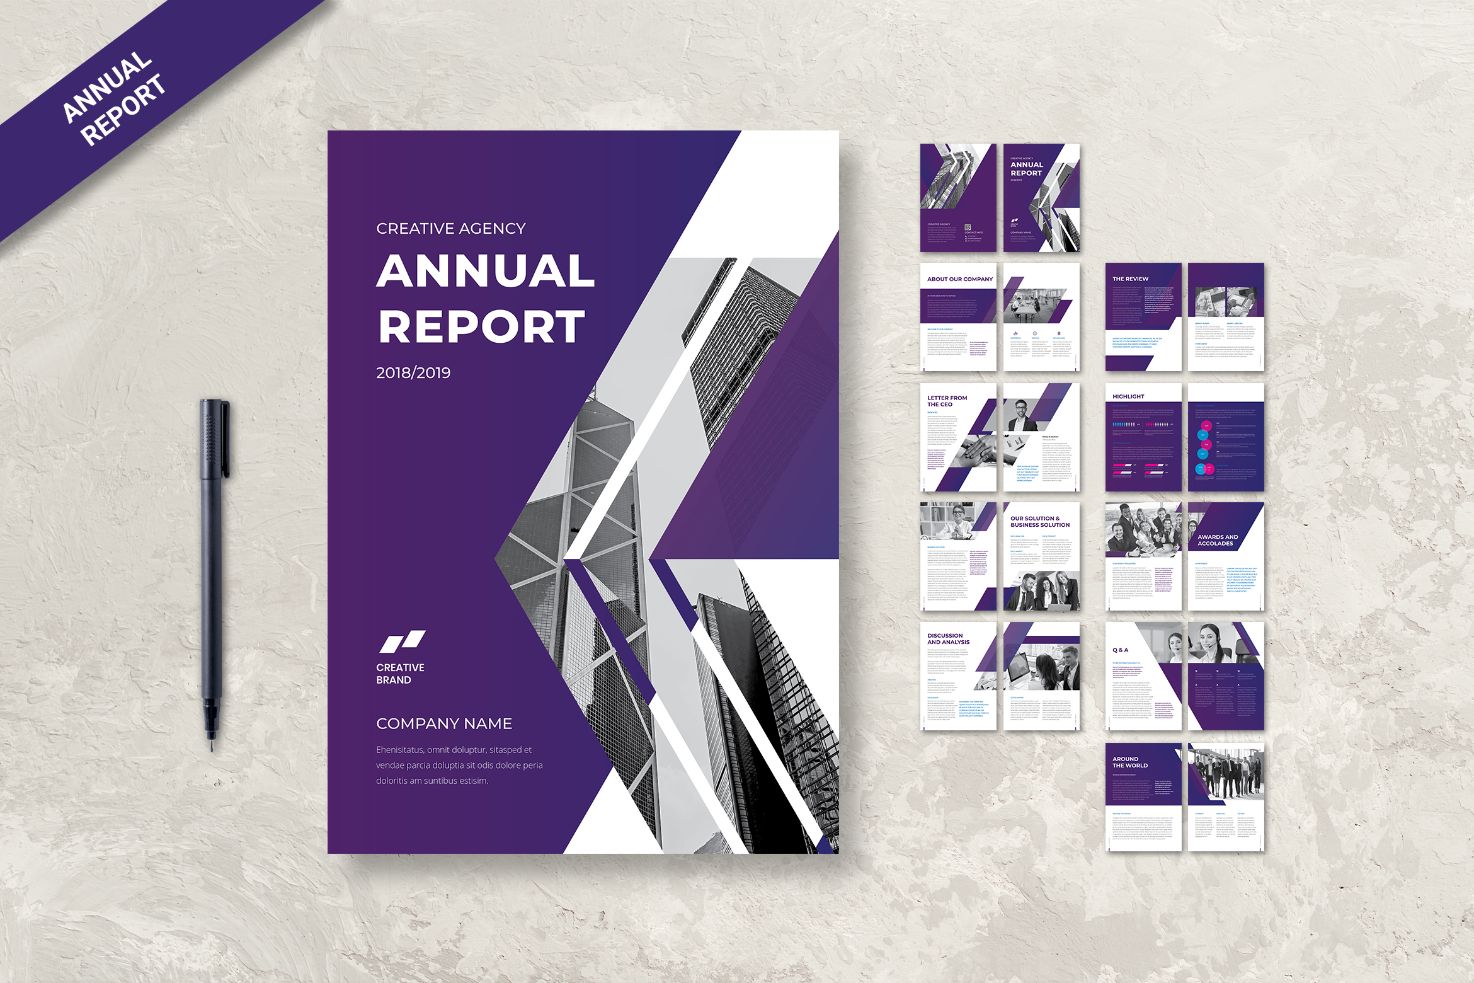 Annual Report About Company - Corporate Identity Template